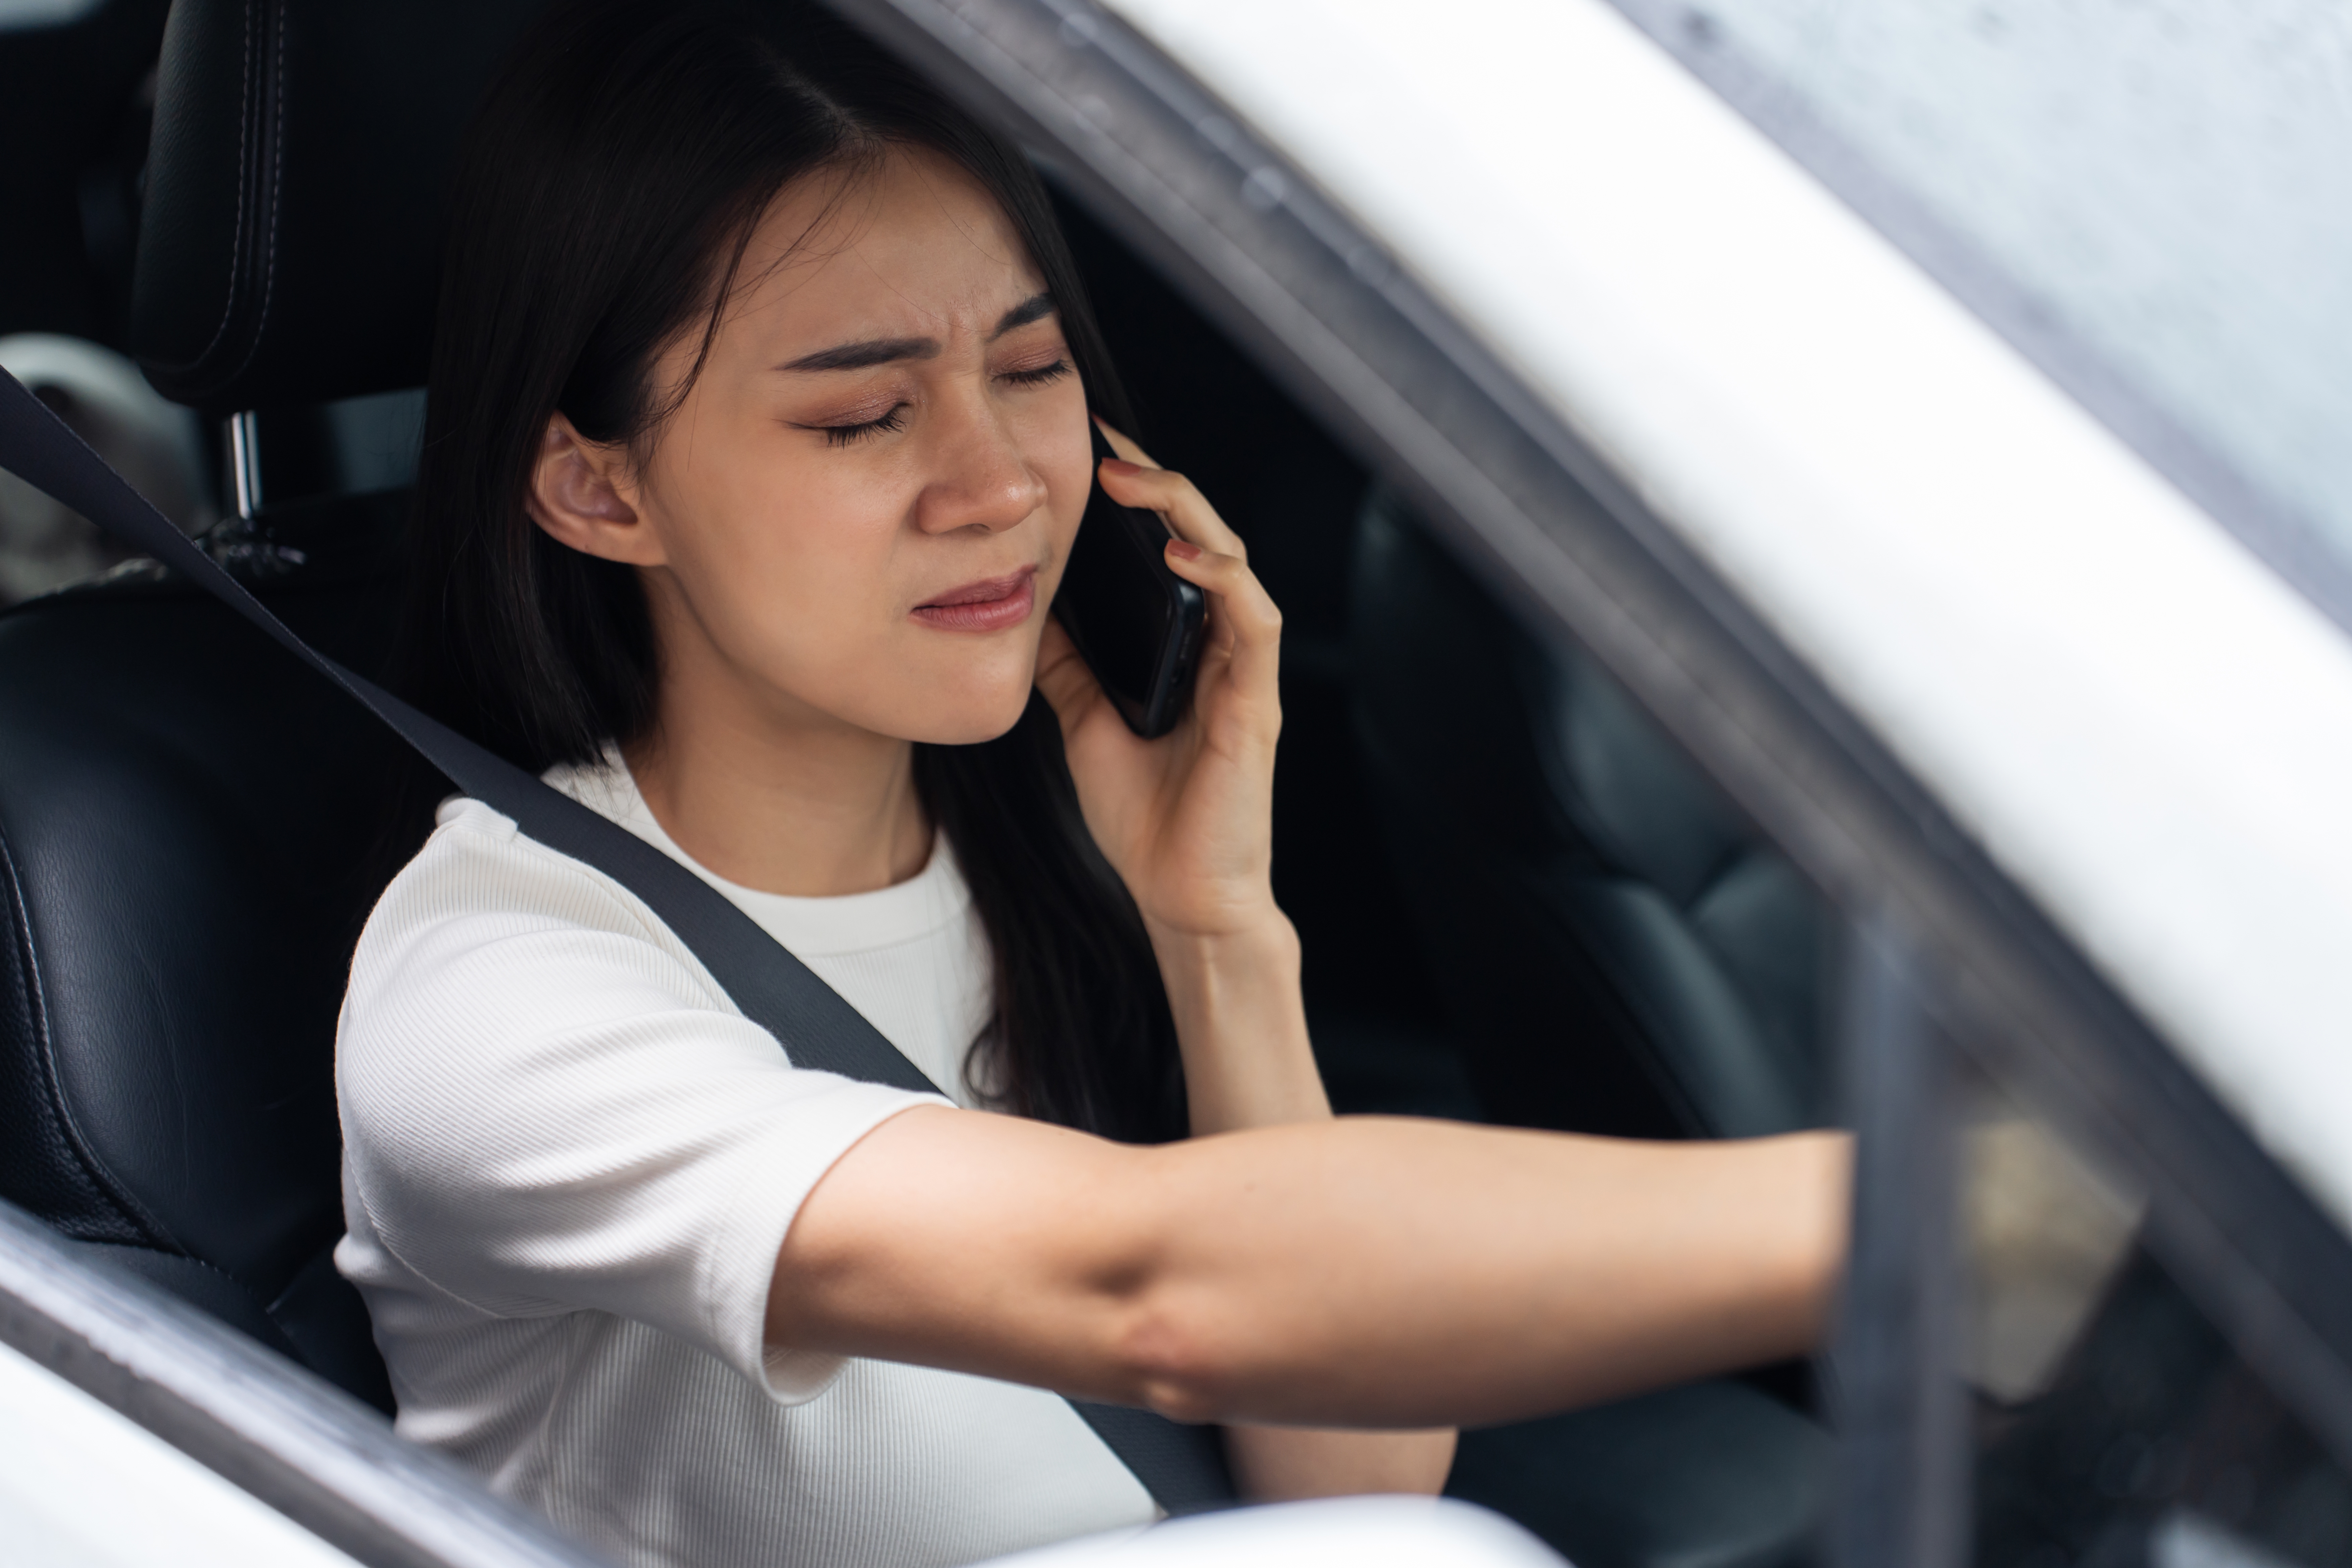 Beautiful woman talk on mobile phone while driving on the road | Source: Shutterstock.com